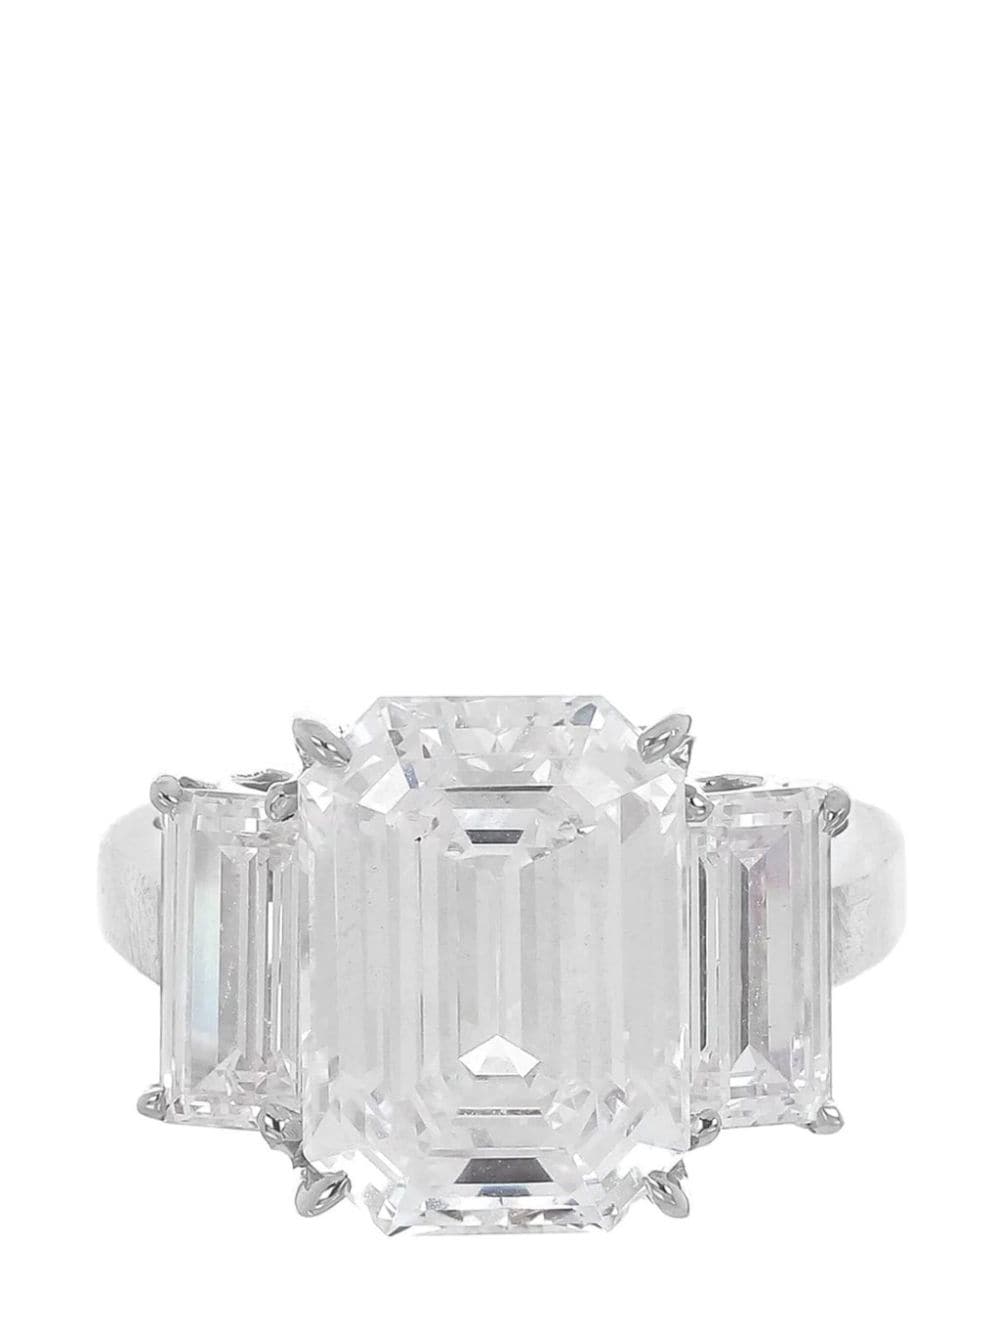 Fantasia by Deserio 14kt white gold cubic zirconia ring - Weiß